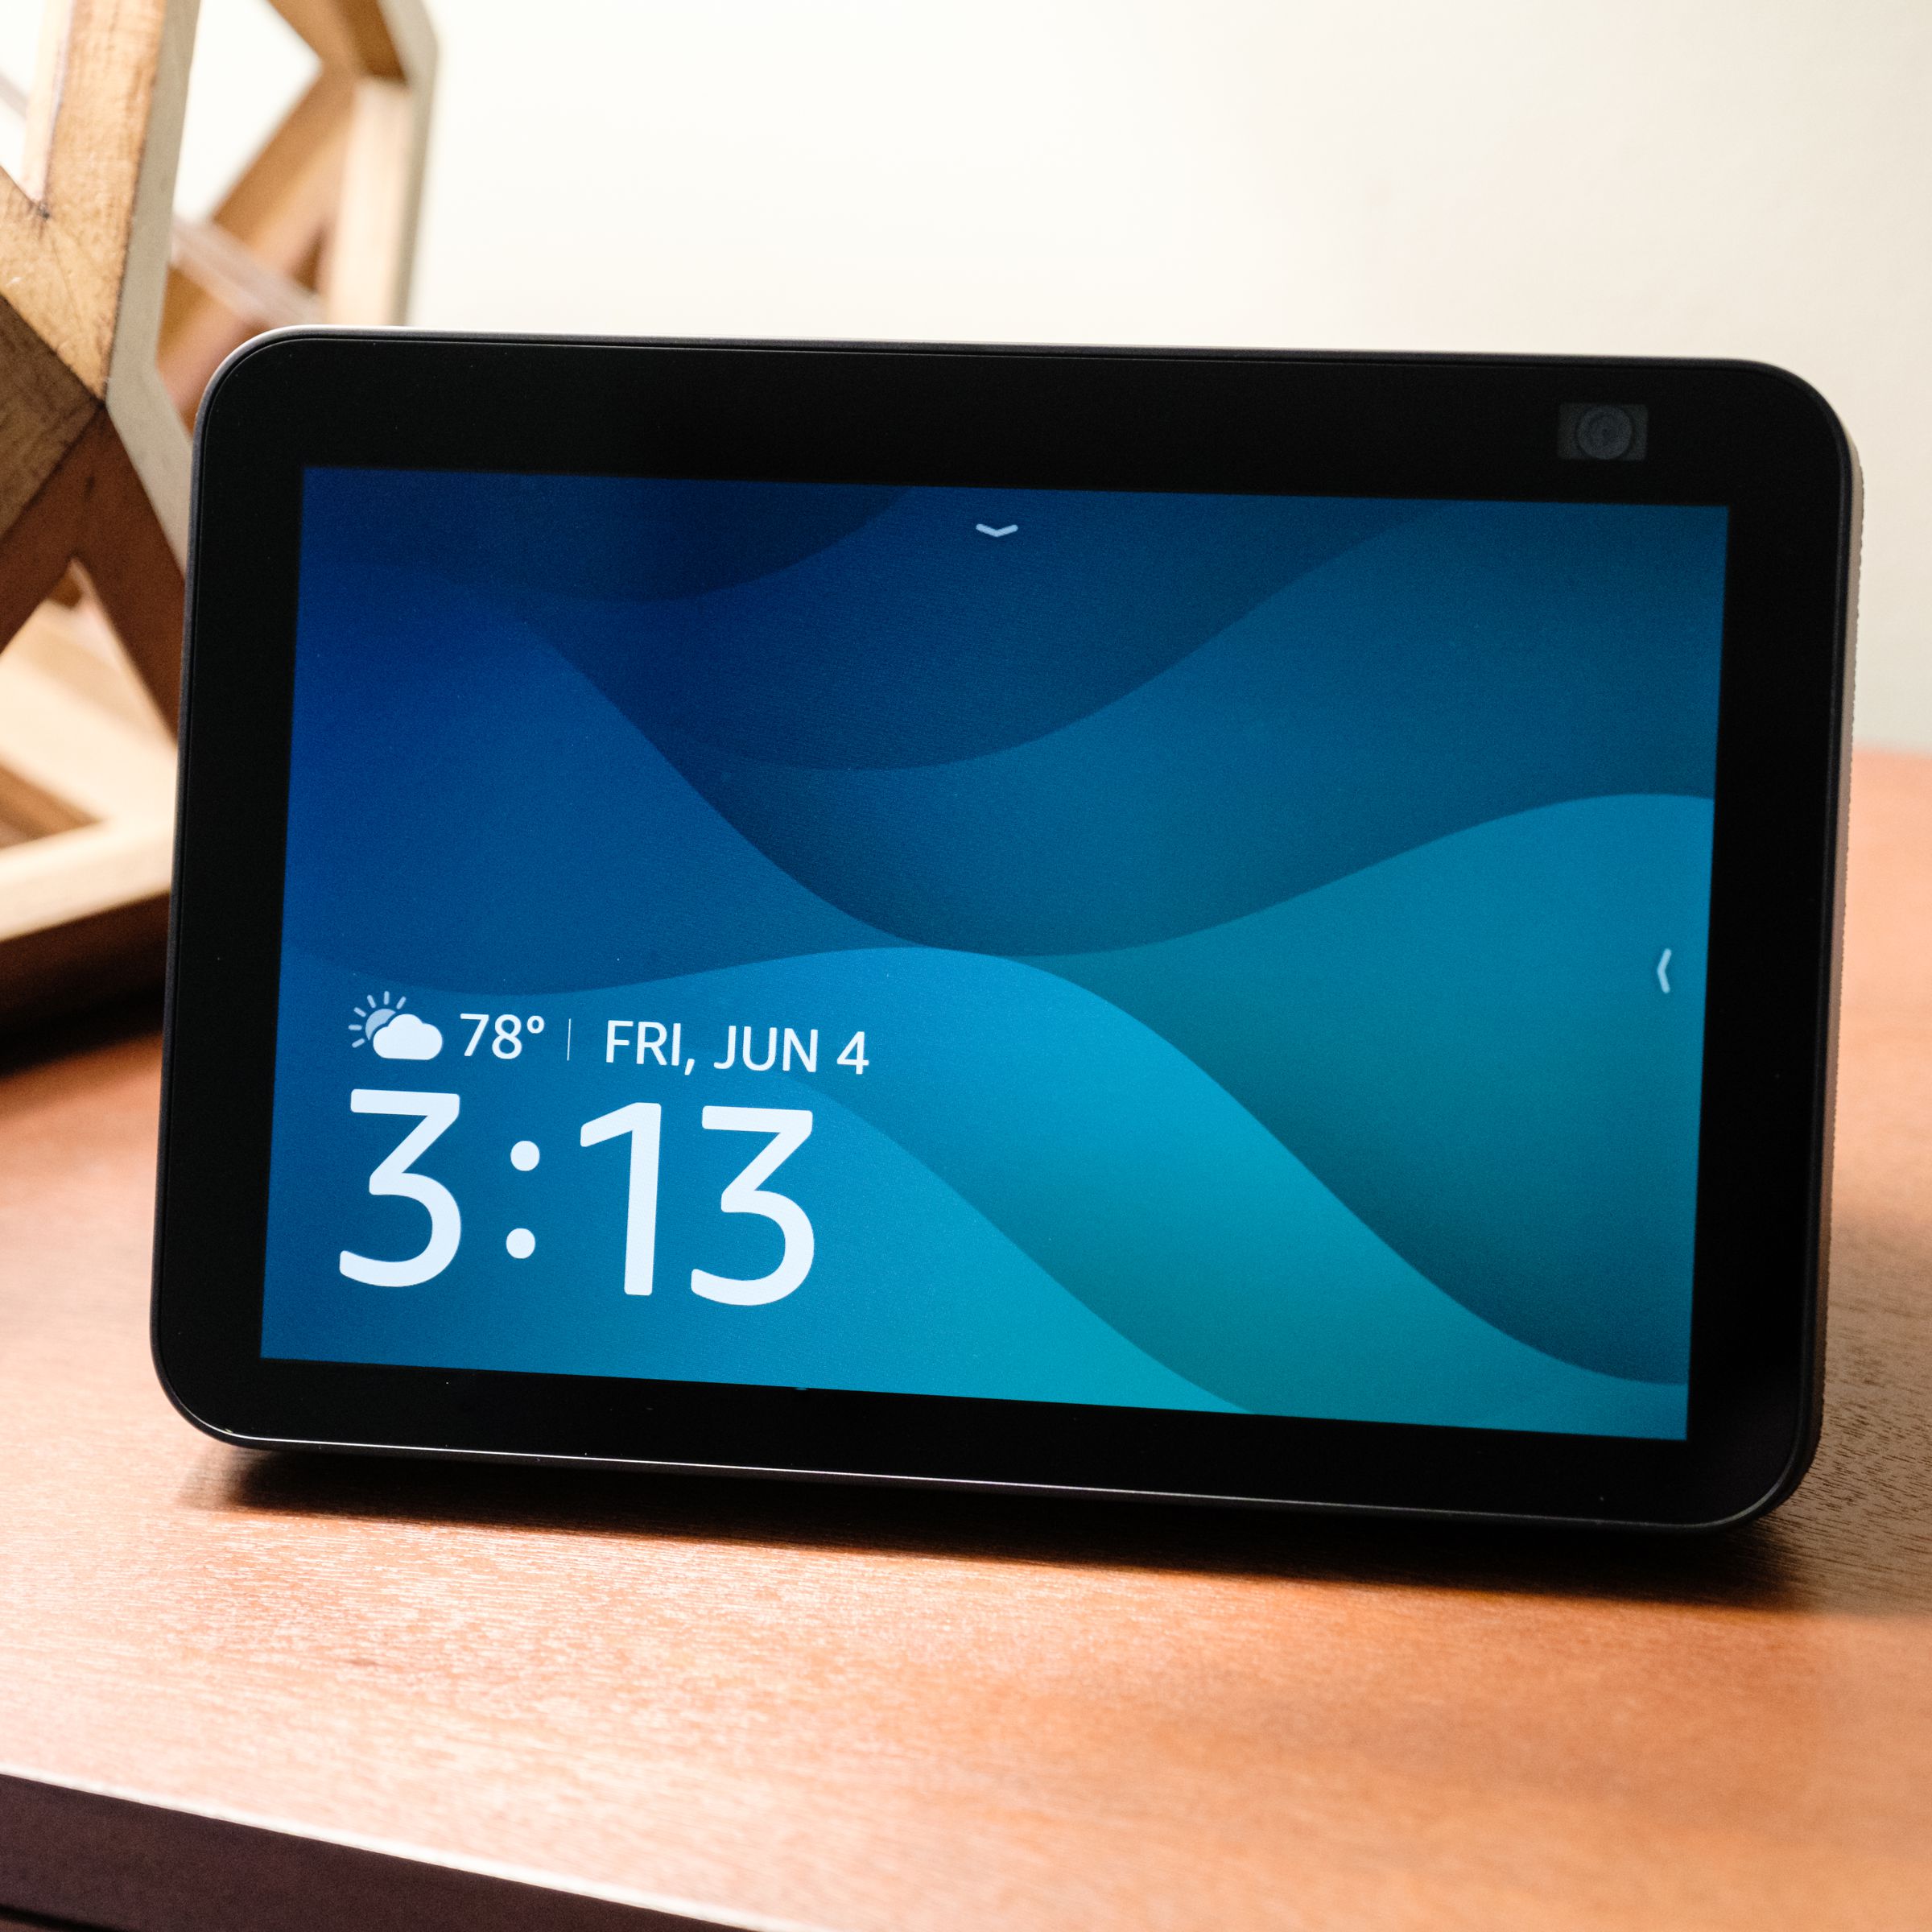 The second-generation Echo Show 8 with the main screen on display and resting on a table.